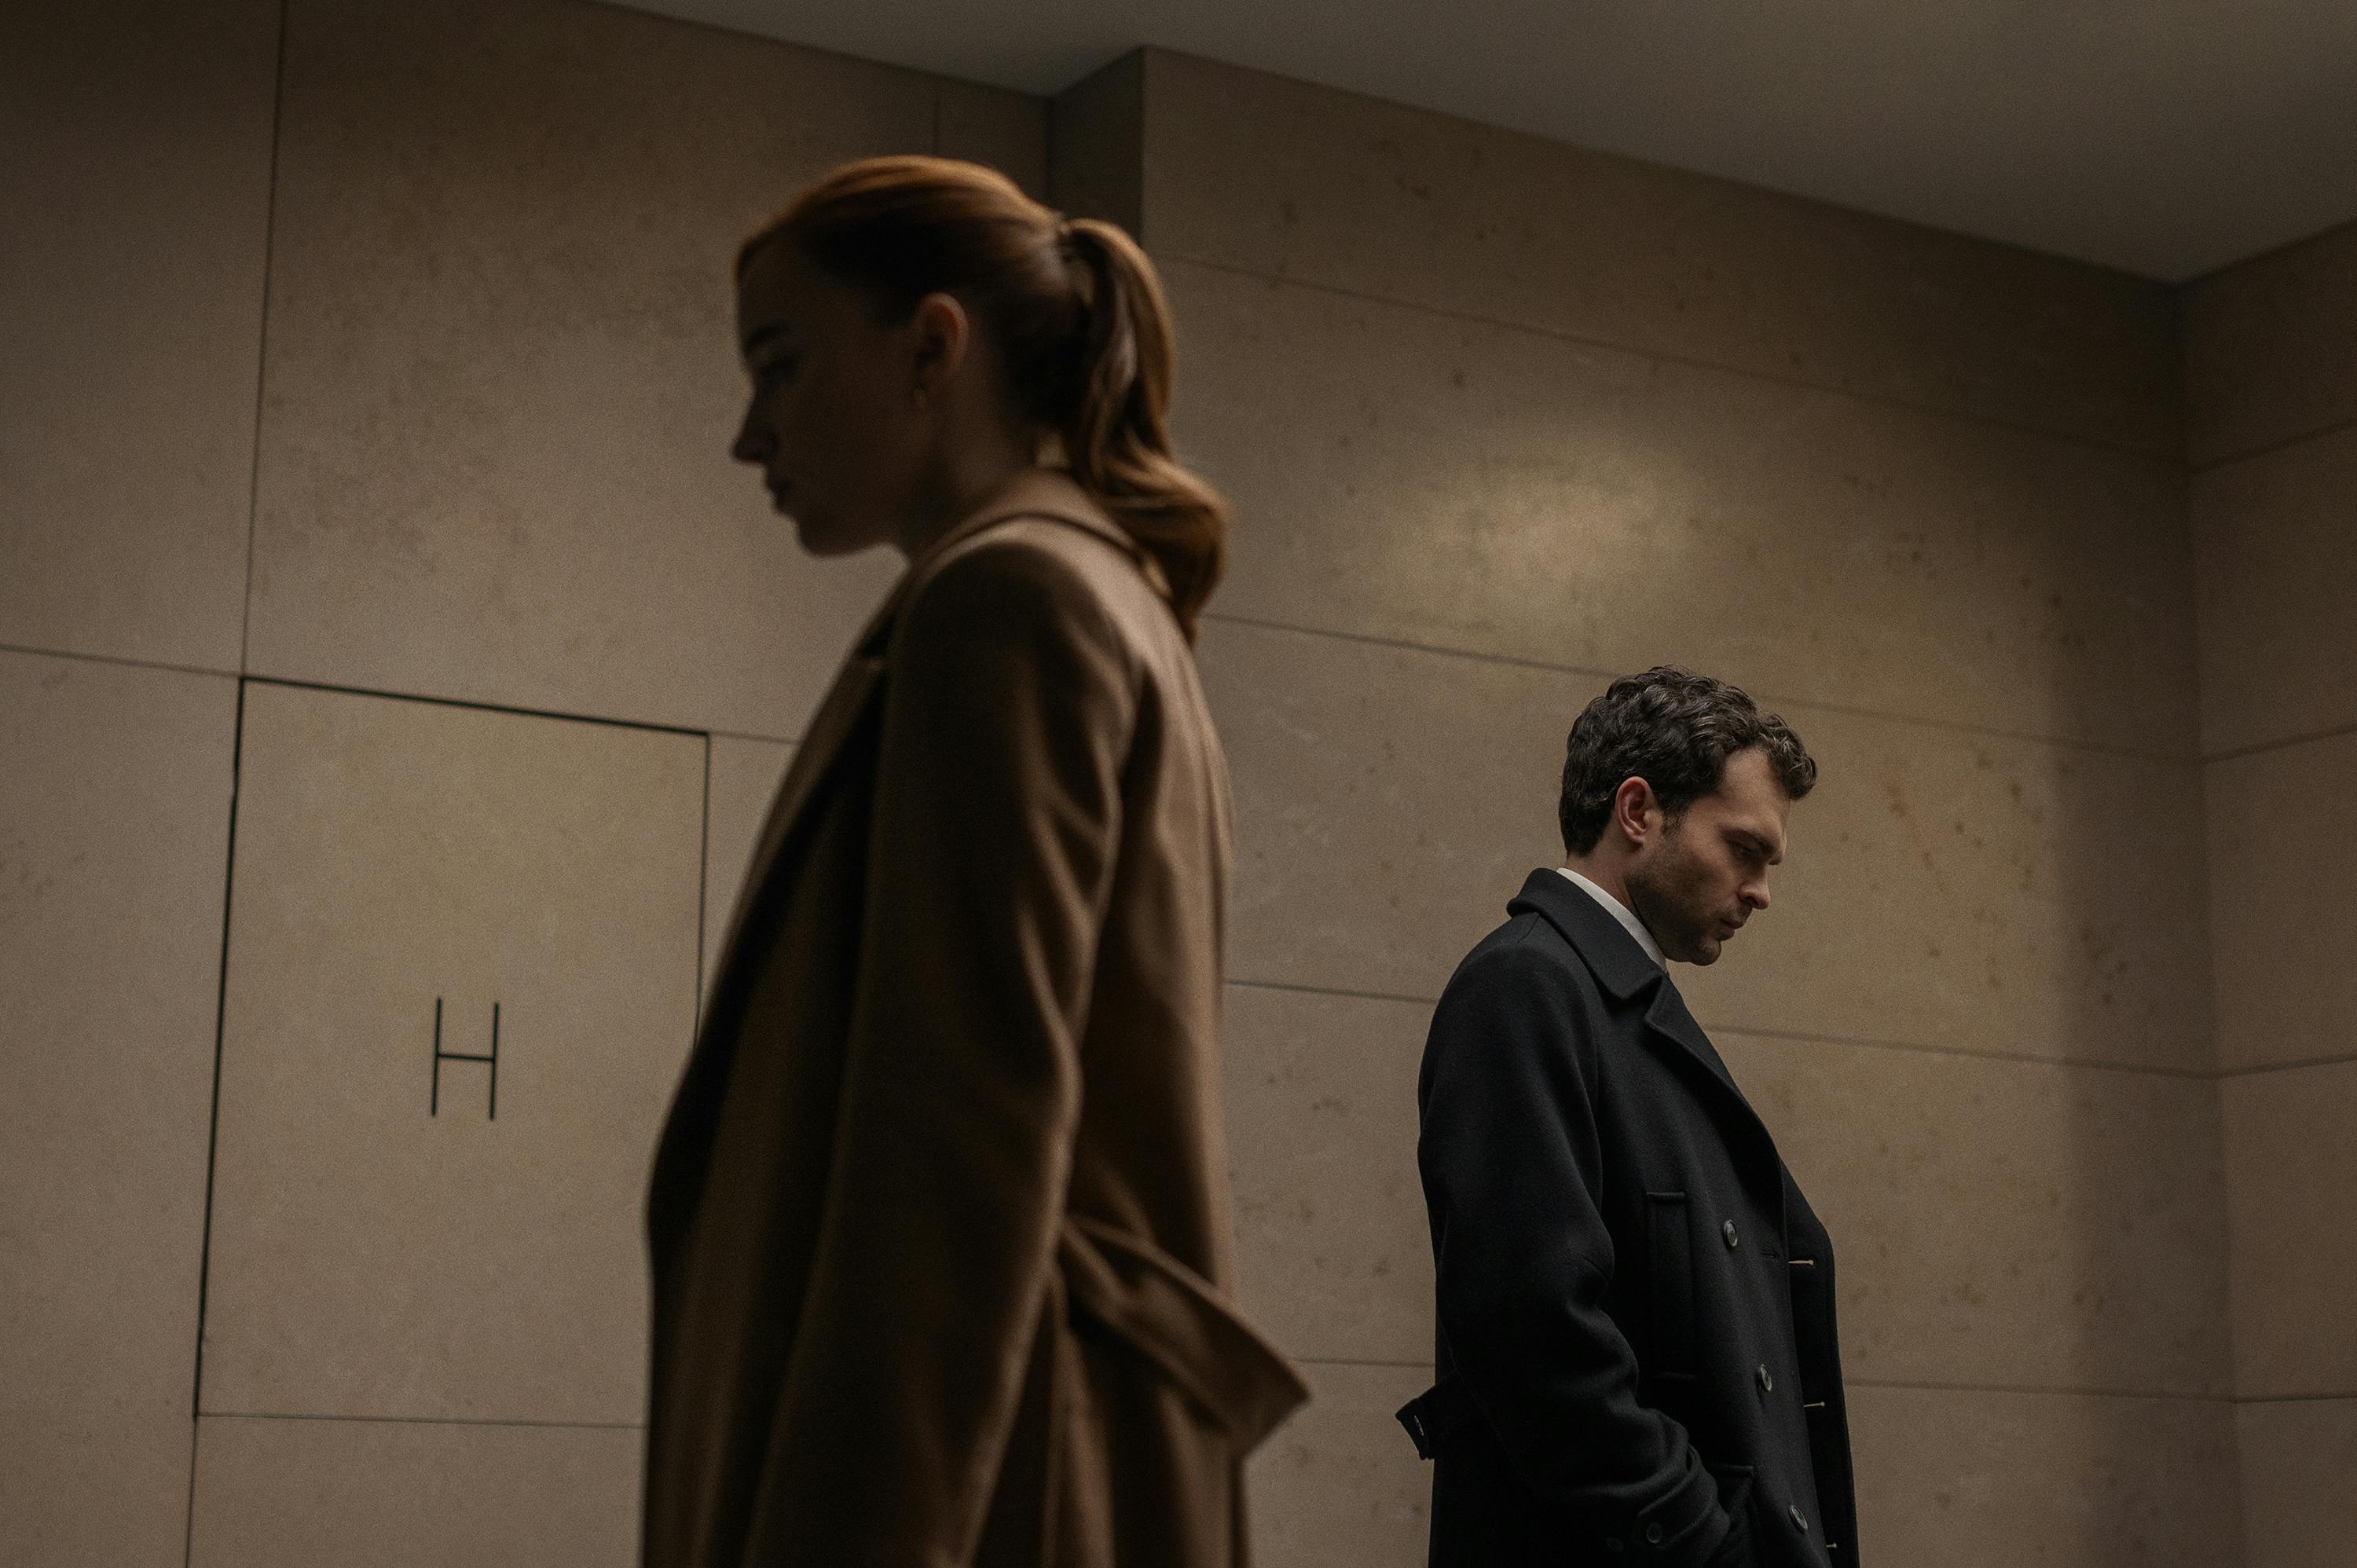 Emily (Phoebe Dynevor) and Luke (Alden Ehrenreich) pass by each other in this dimly-lit shot. Both actors' faces are in profile.